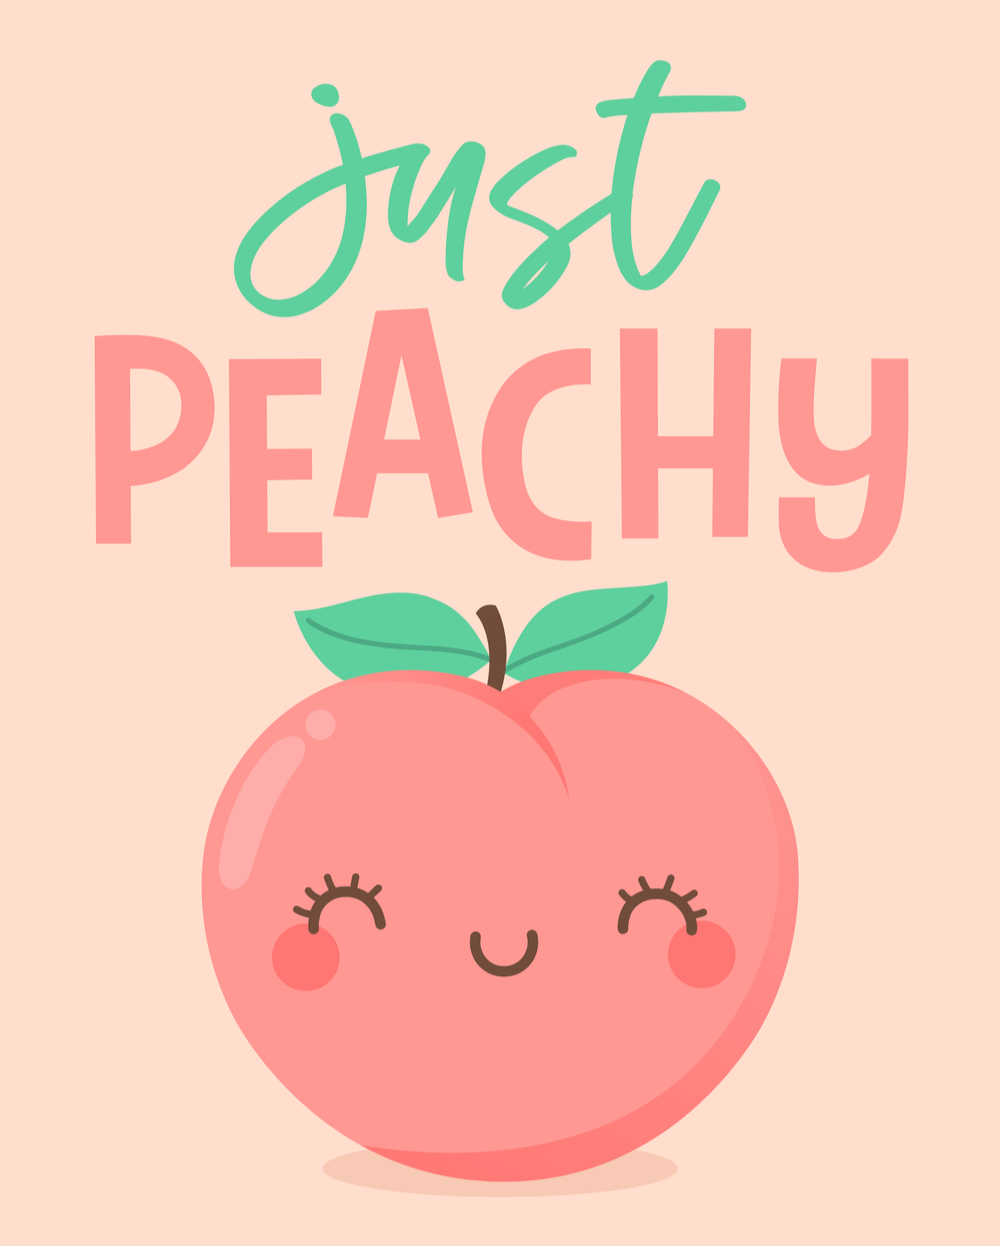 A graphic that says "just peachy" with a cute smiling peach below it.